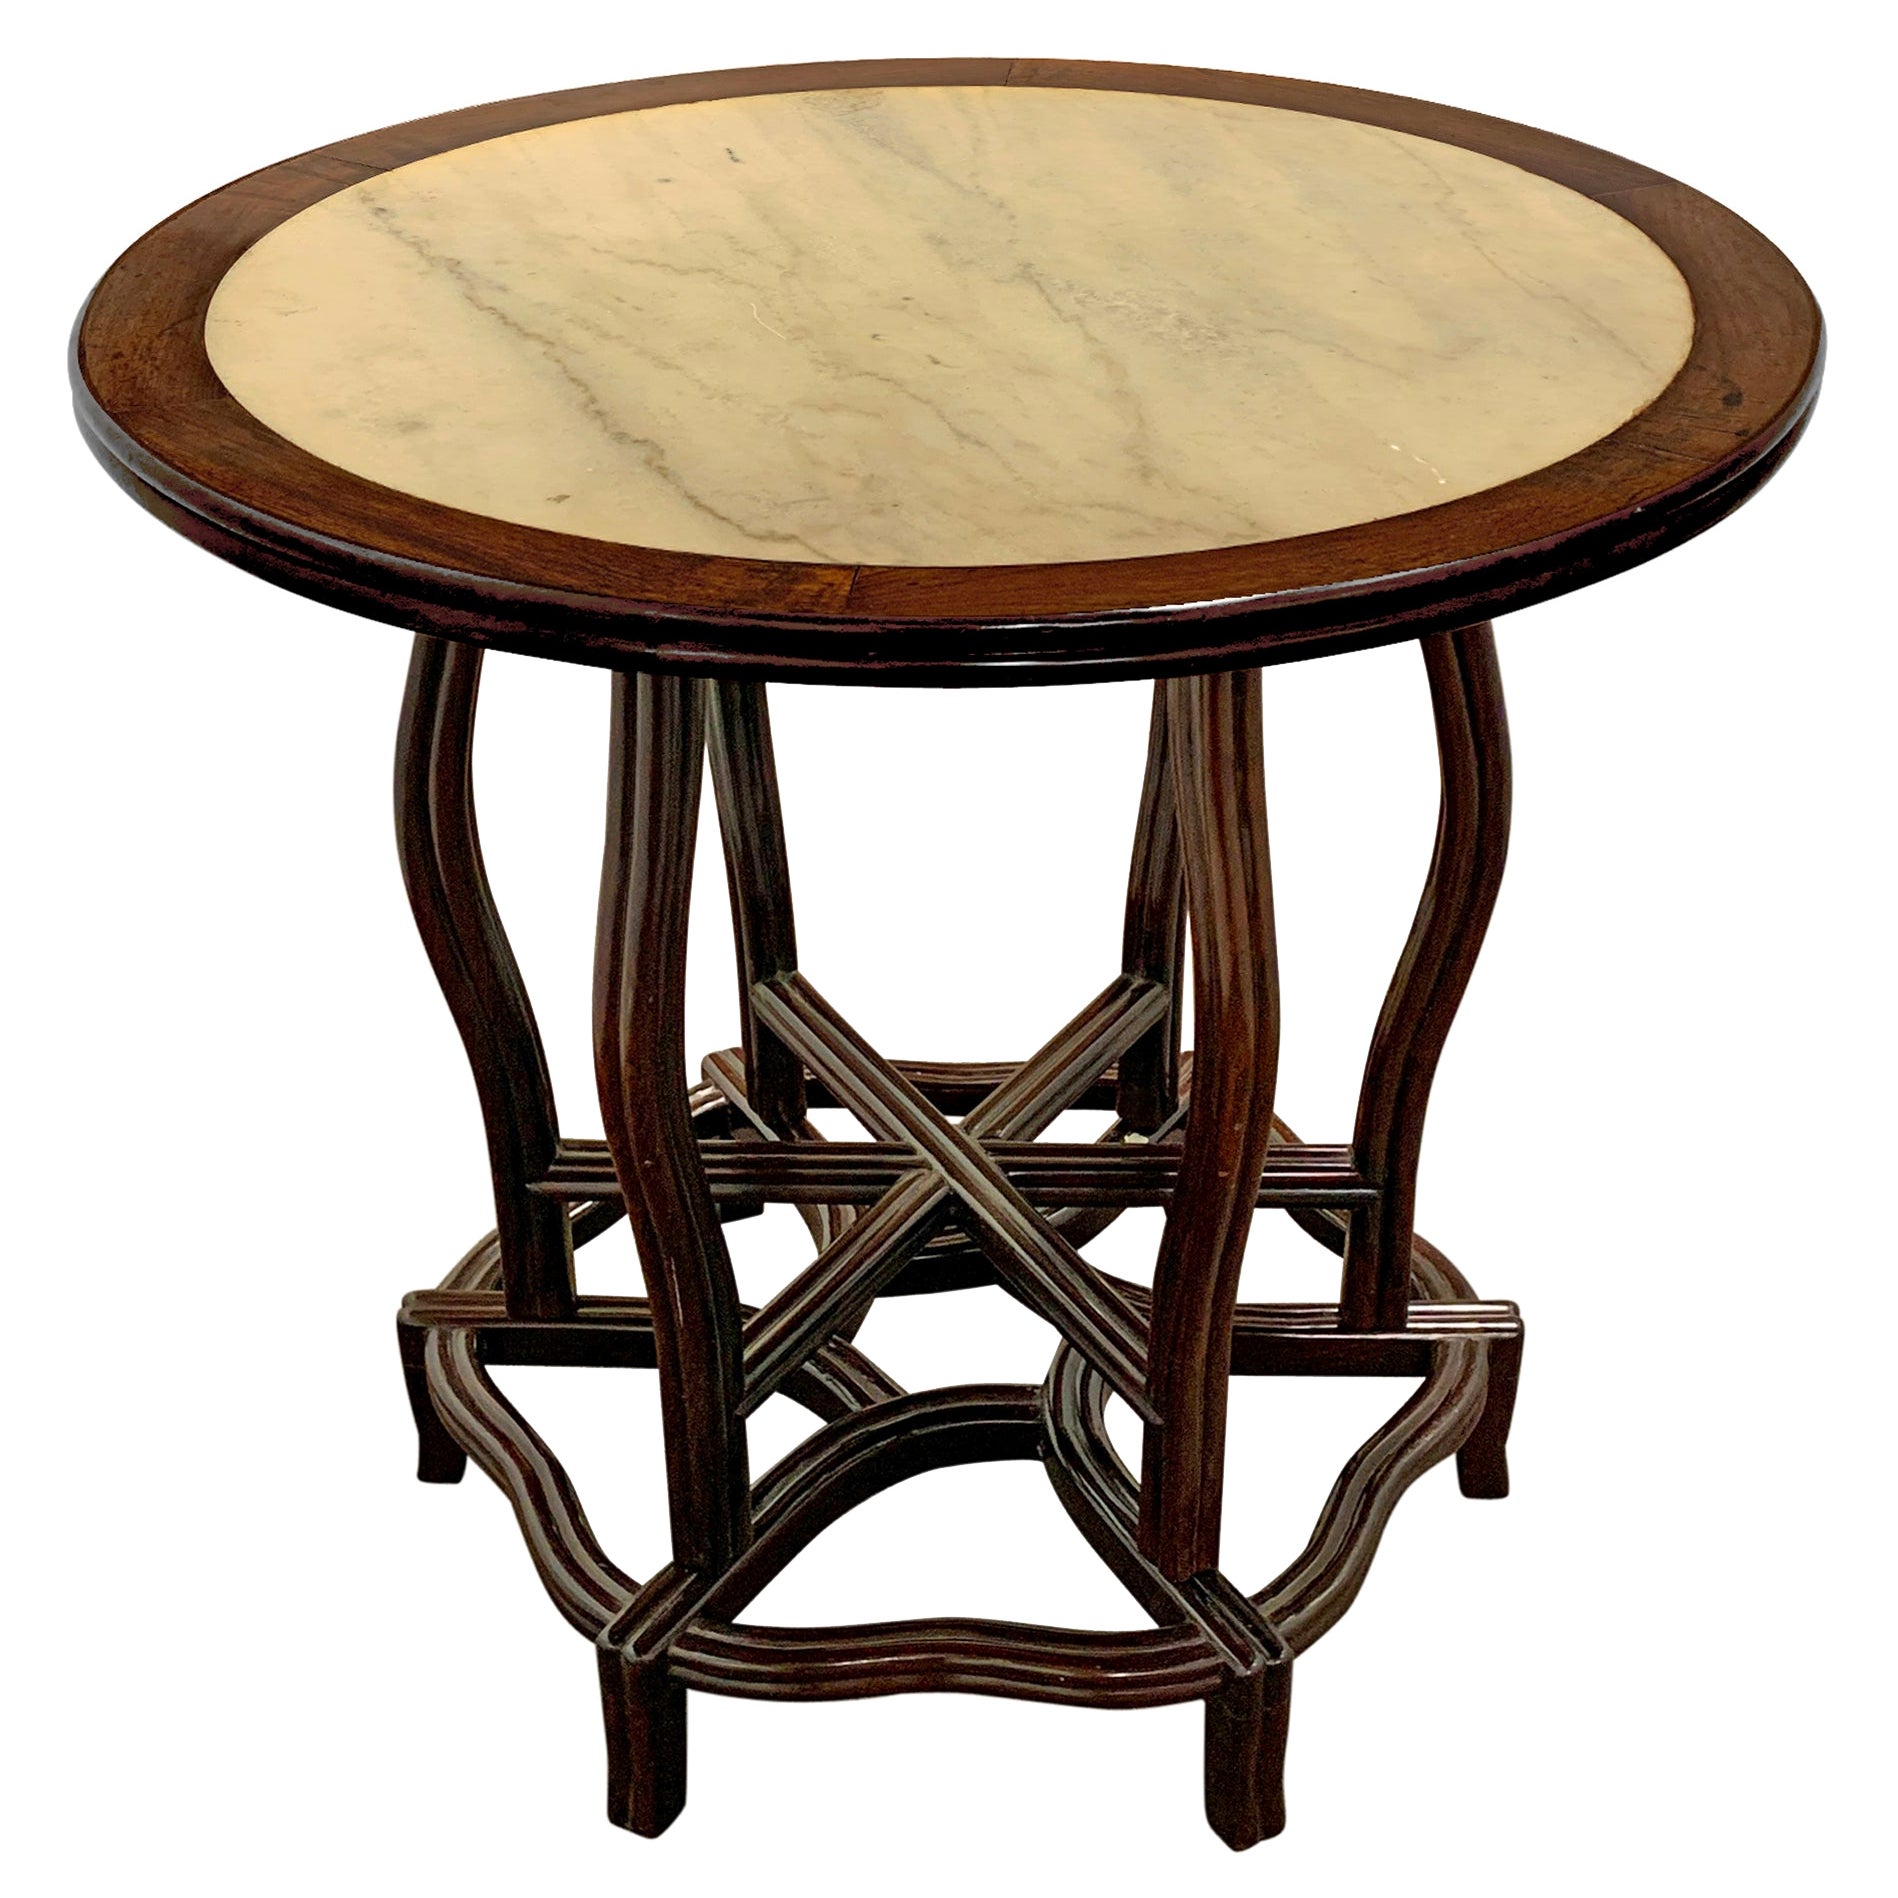 Chinese Art Deco Center Table